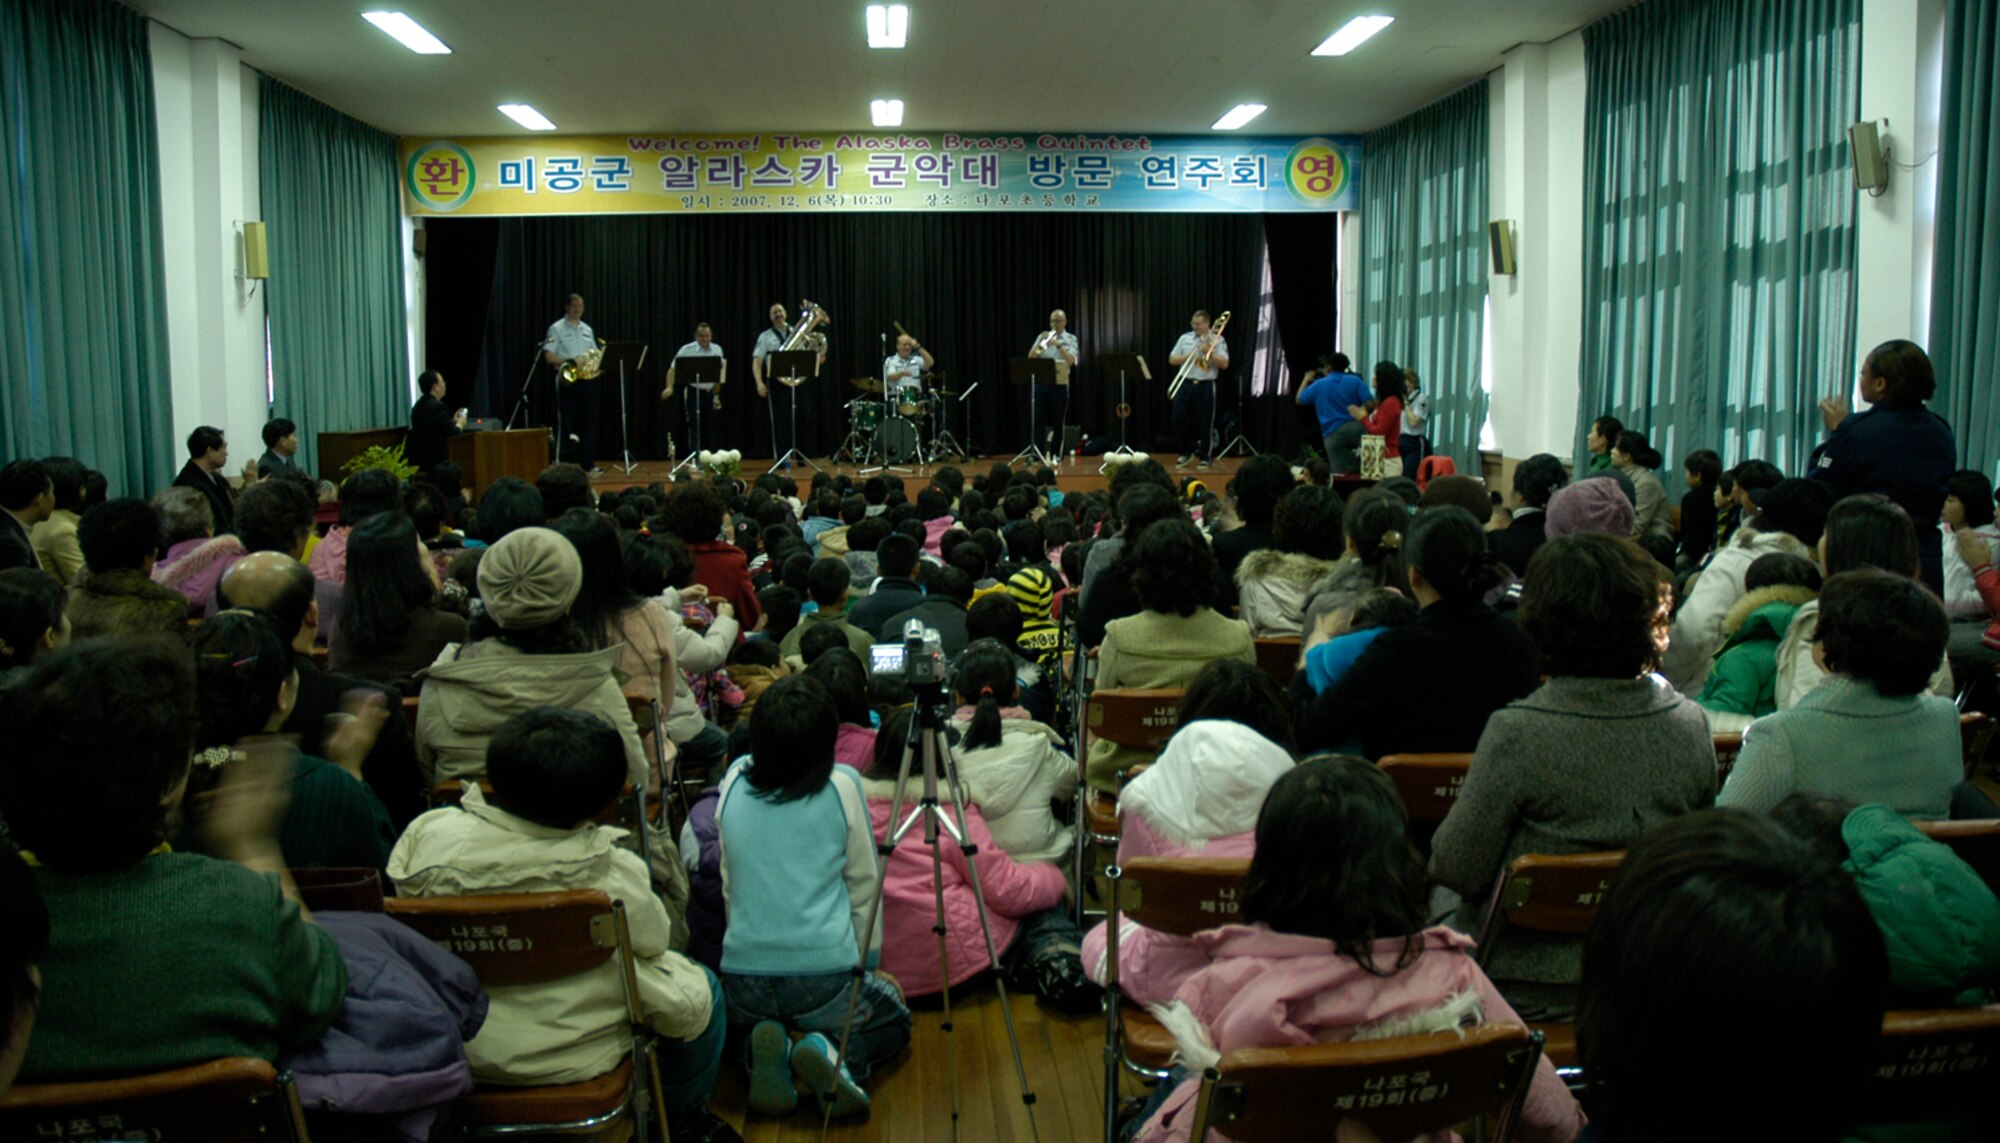 KUNSAN AIR BASE, South Korea -- Air Force Band of the Pacific perform for students at Na Po Elementary School during the groups performance at the local Gunsan City School Dec. 5. The Elmendorf Air Force Base, Alaska based band performed for more than 300 students, parents and teachers as part of their civic outreach and the base's Good Neighbor Program. (U.S. Air Force Photo/Master Sgt. Sean P. Houlihan)